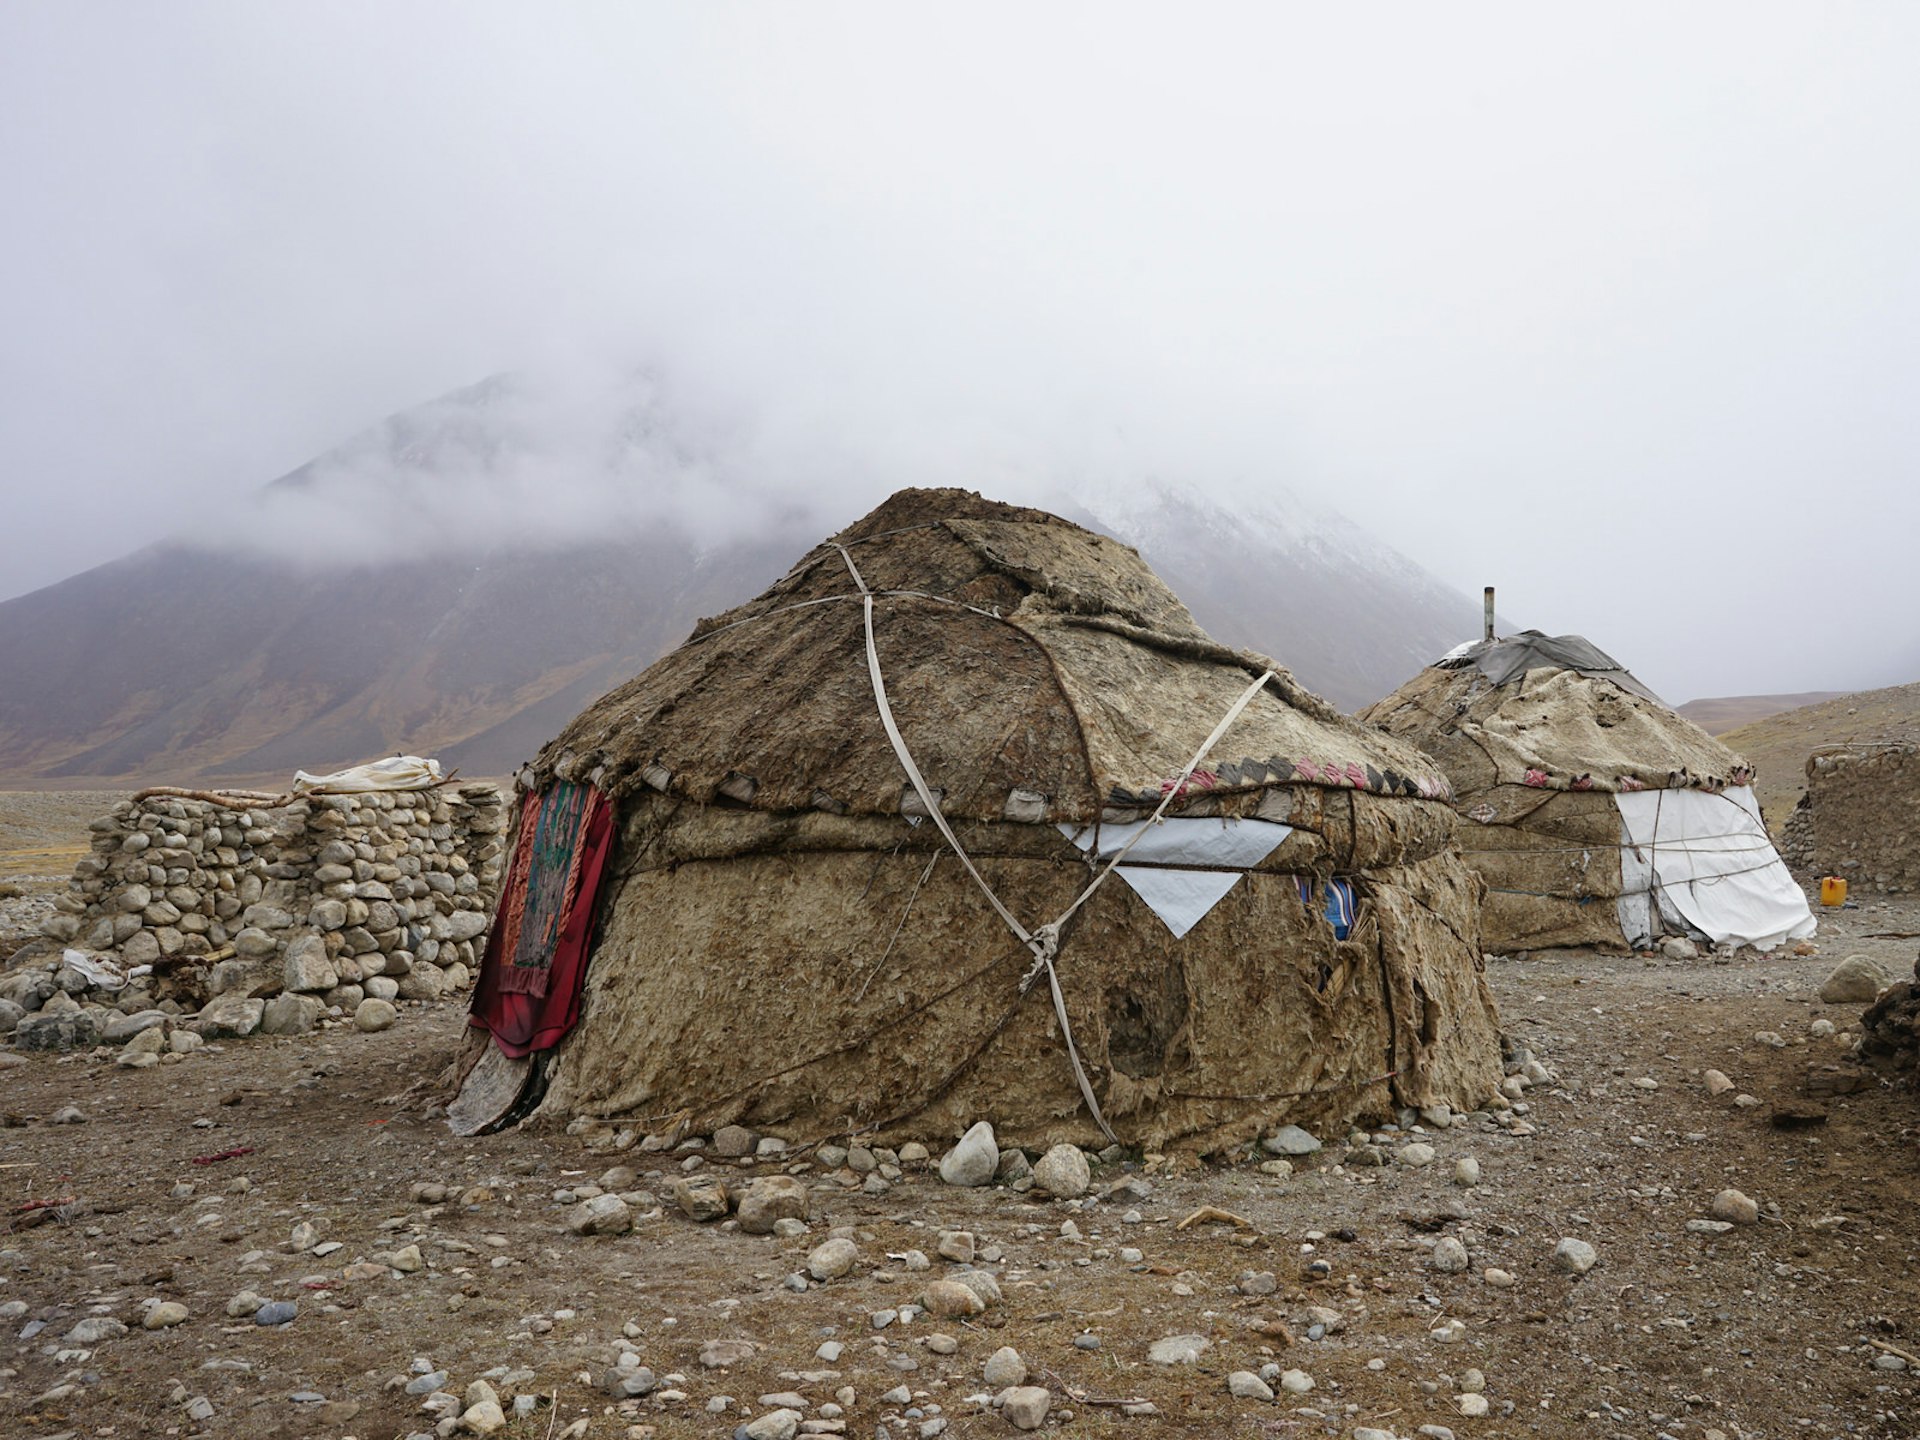 A traditional yurt tent camp made of wool and leather with mountains and fog in the background